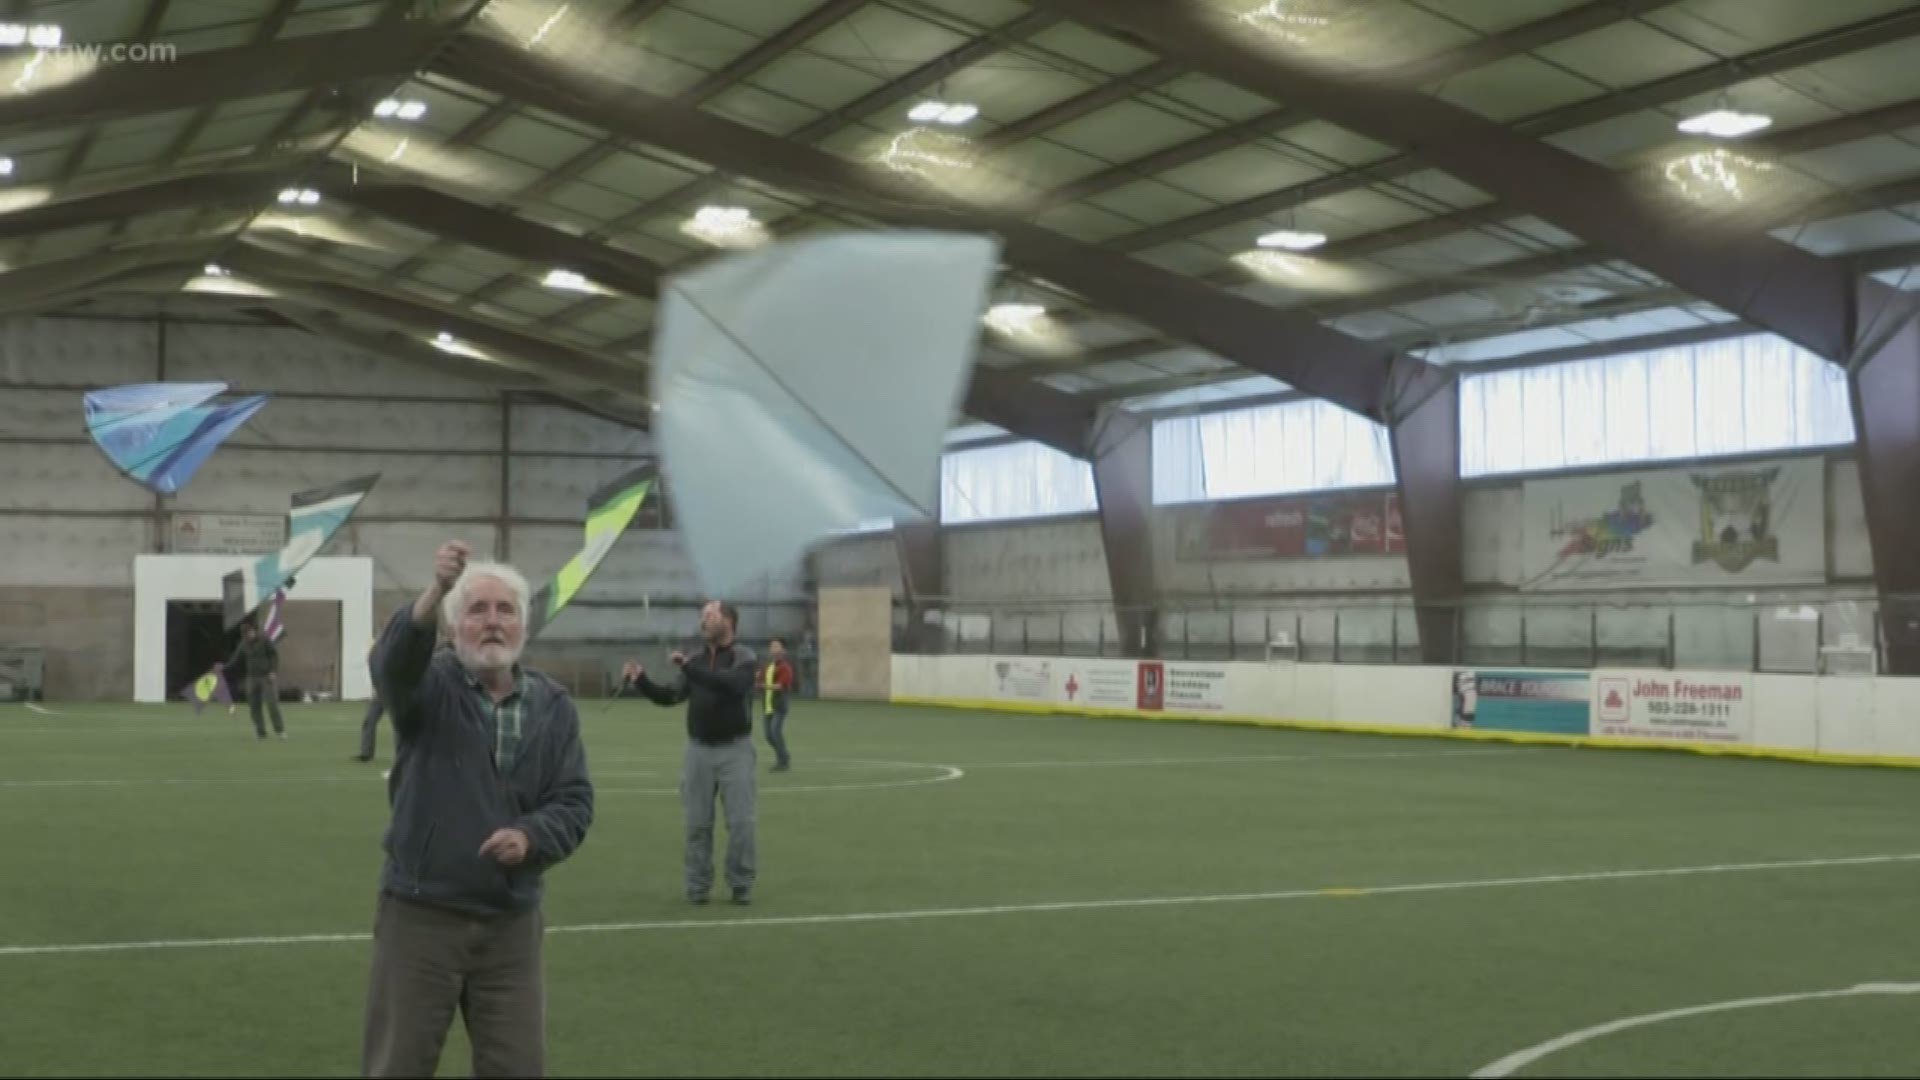 Who knew? You can fly kites indoors in Oregon. For decades, amateurs and pros have been going to Oregon Soccer Center to fly them.